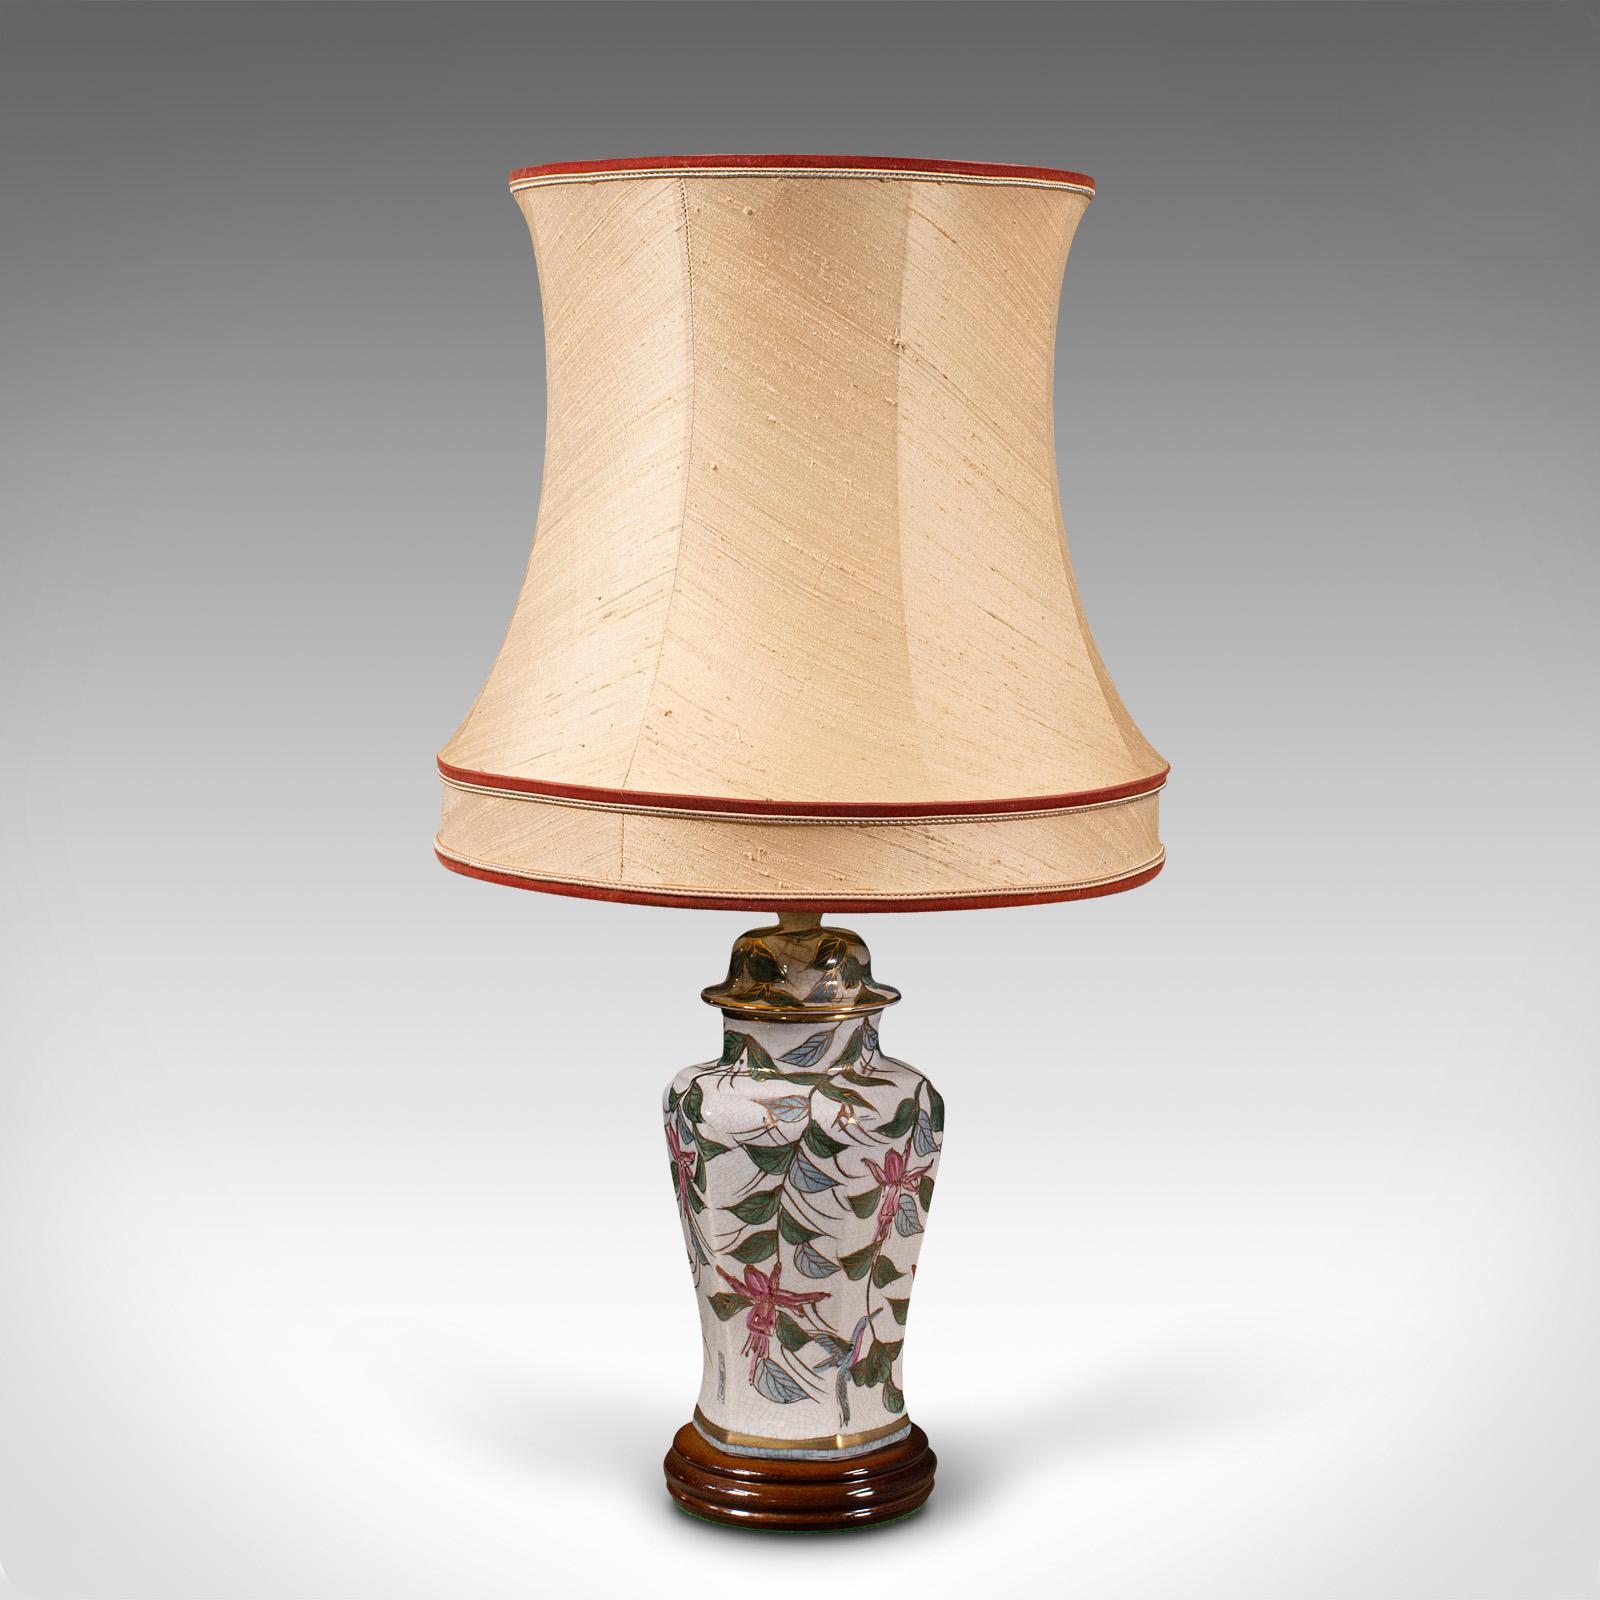 This is a vintage table lamp. A Chinese, ceramic decorative light, dating to the late Art Deco period, circa 1940.

Of pleasing foliate decoration, with a distinctive quality shade.
Displays a desirable aged patina and in good order.
Hexagonal